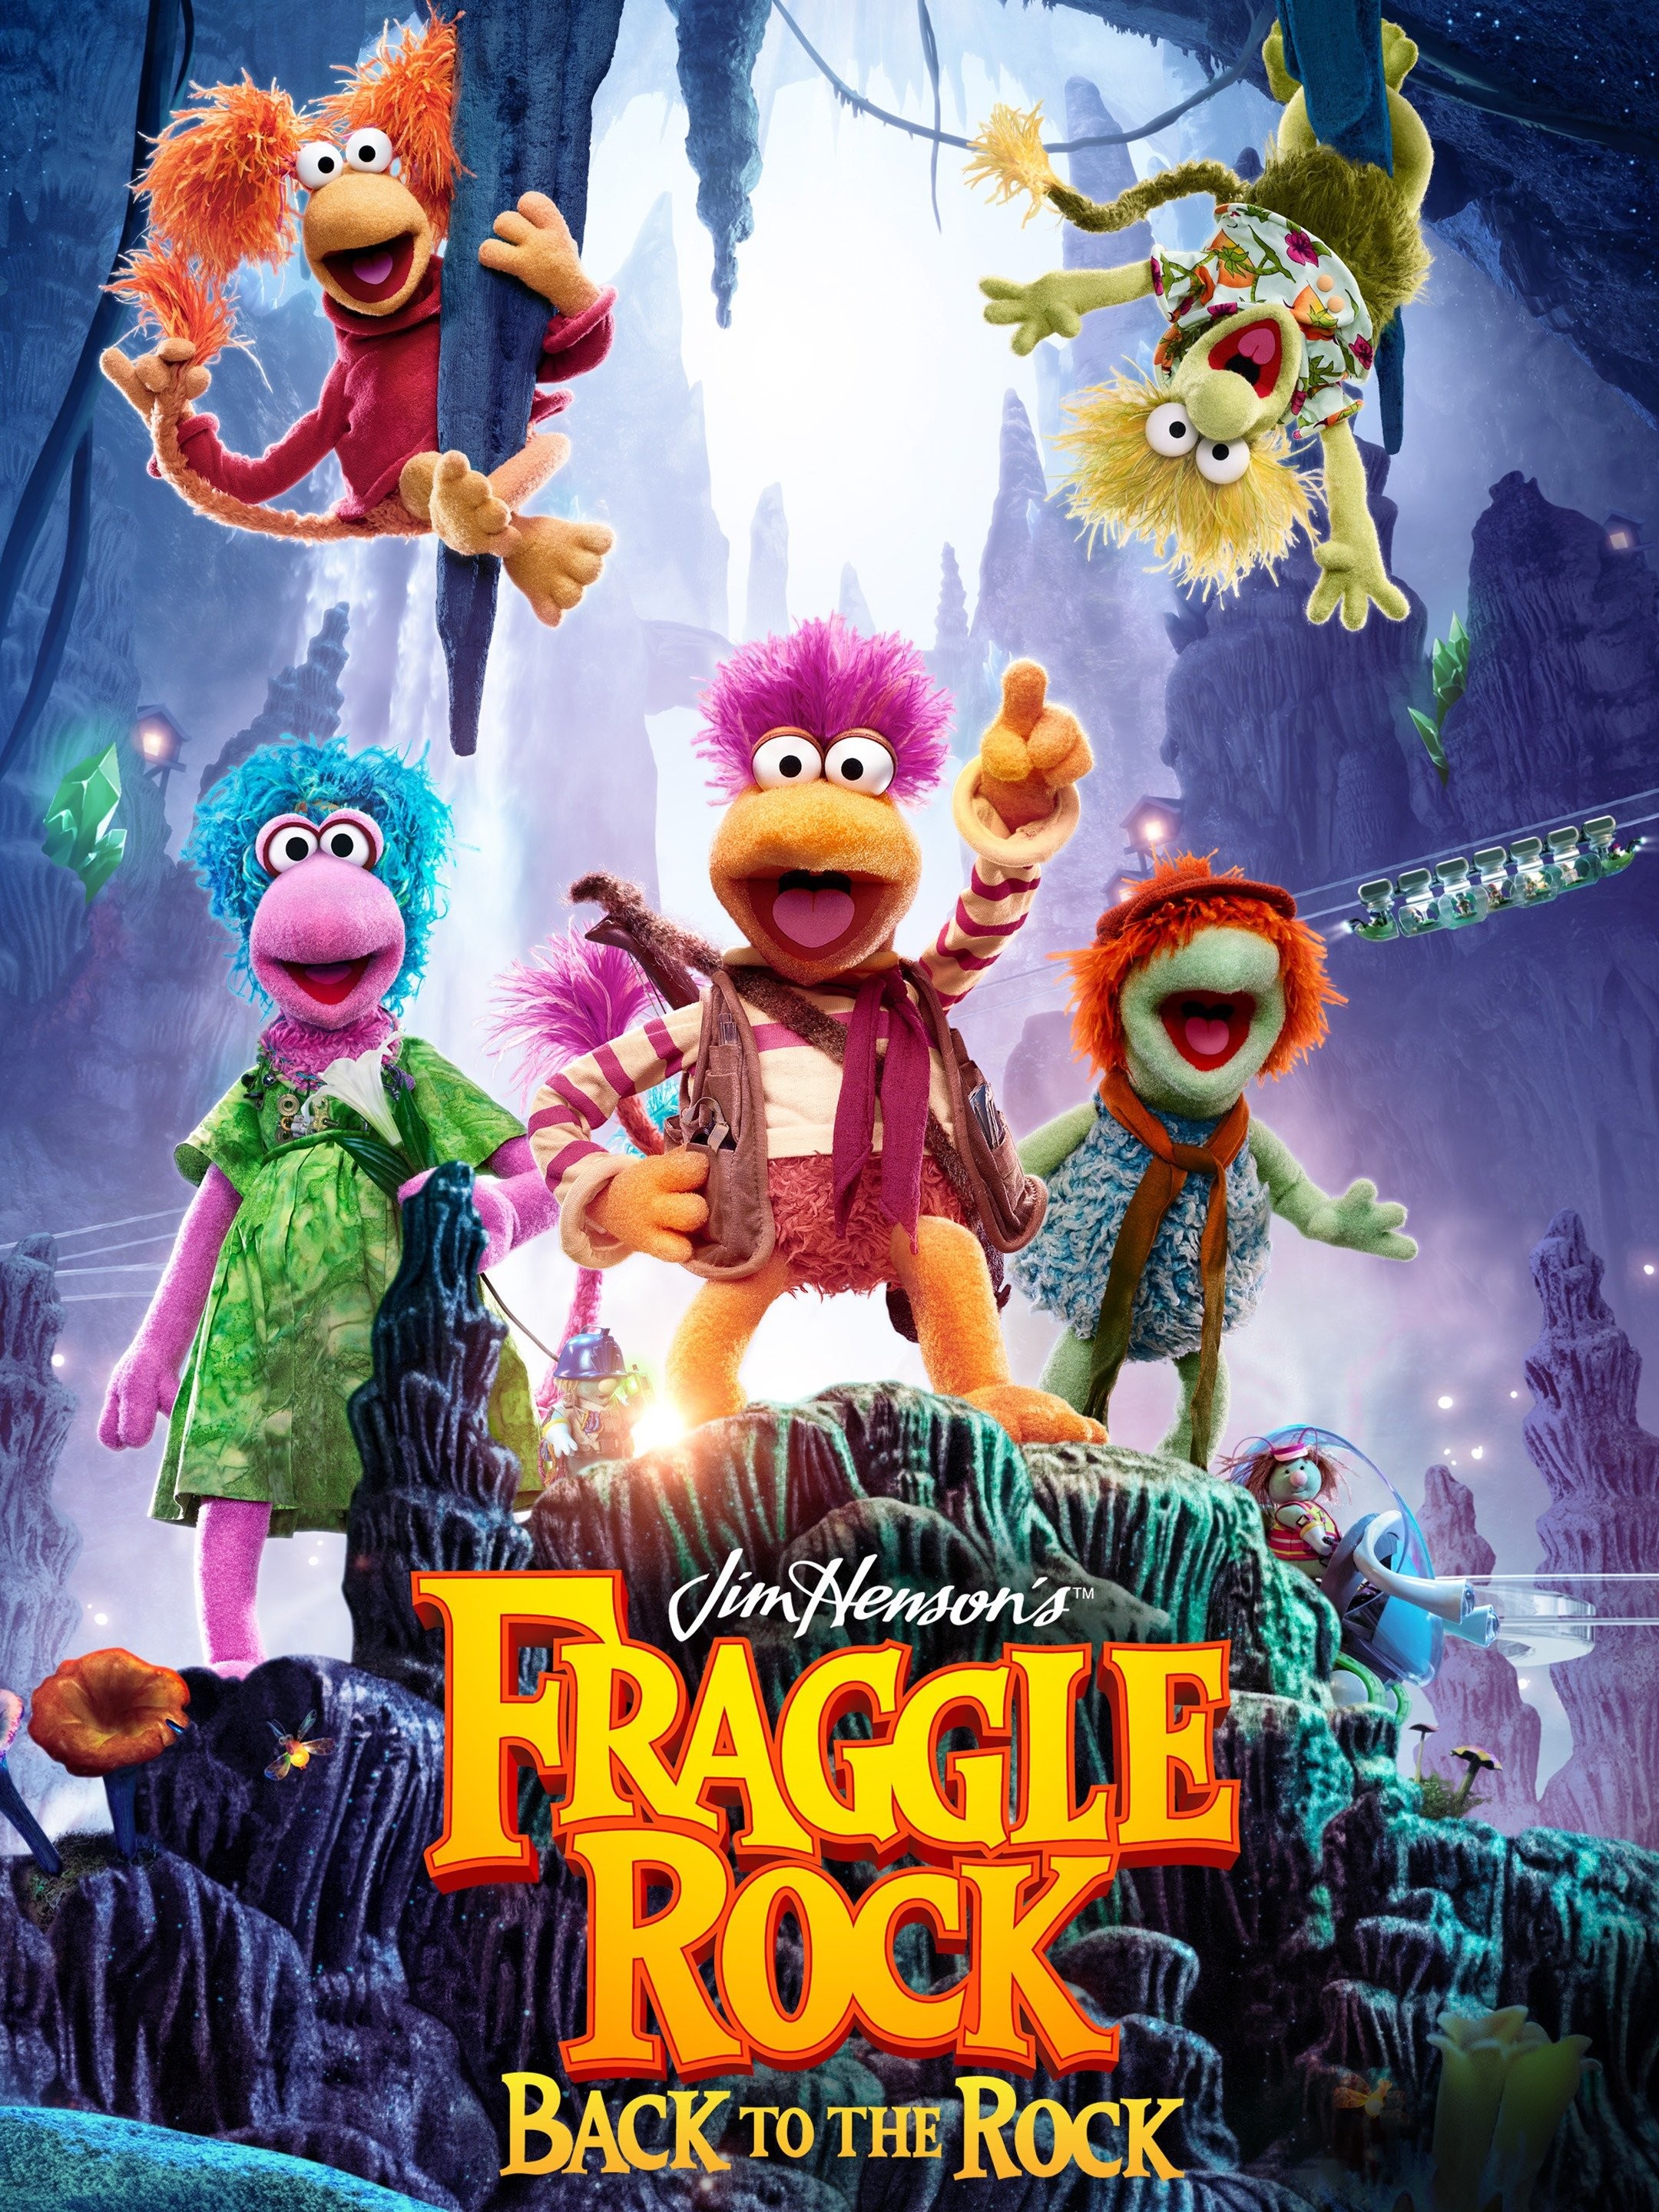 Fraggle Rock Cast Guide: Every Cameo & Guest Star In Back To The Rock